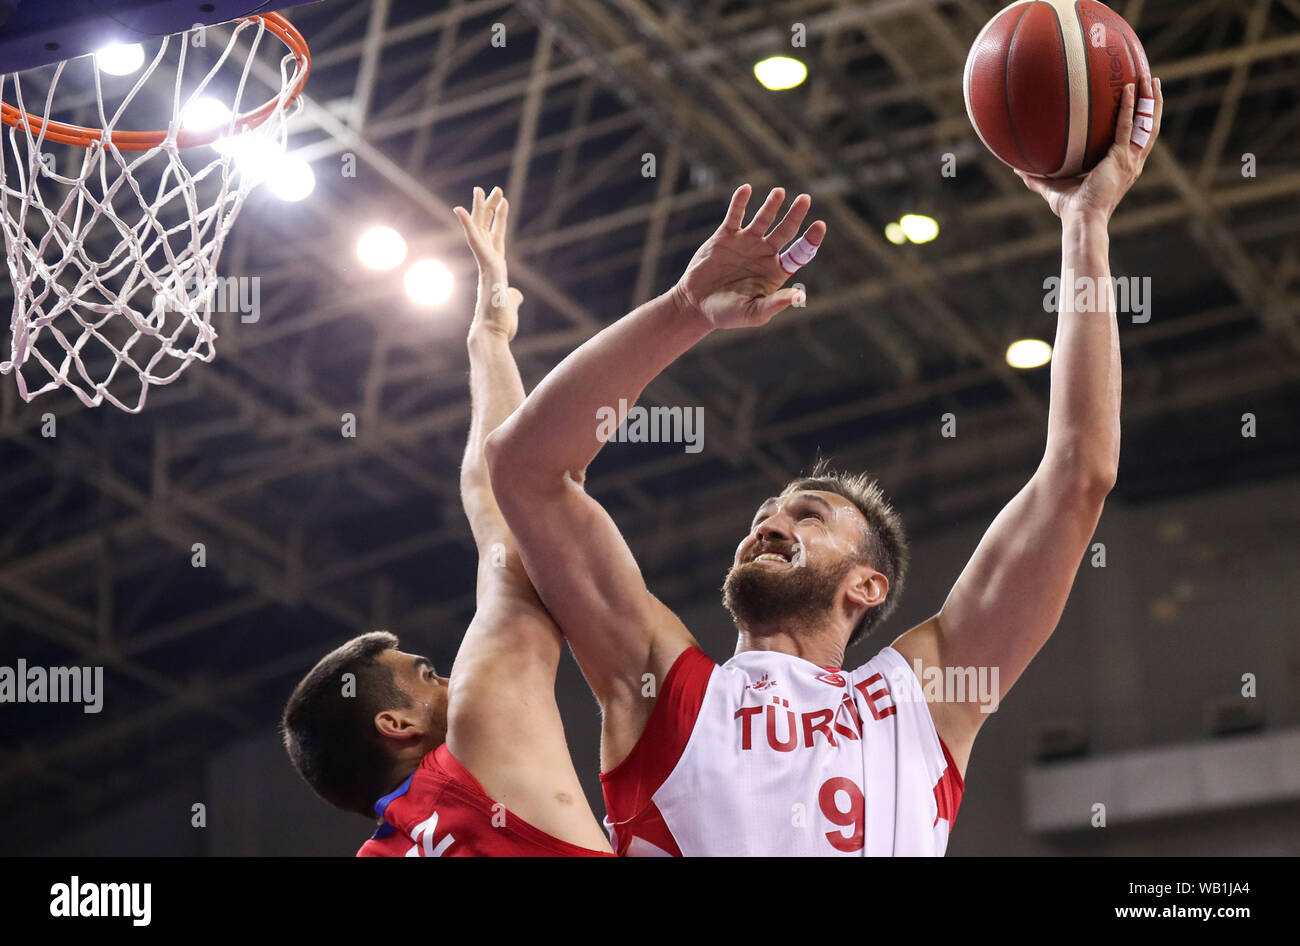 Suzhou, China's Jiangsu Province. 23rd Aug, 2019. Turkey's Semih Erden (R) goes for the basket during a match against Puerto Rico at the 2019 Suzhou International Basketball Challenge and Culture Week in Suzhou, east China's Jiangsu Province, Aug. 23, 2019. Credit: Yang Lei/Xinhua/Alamy Live News Stock Photo